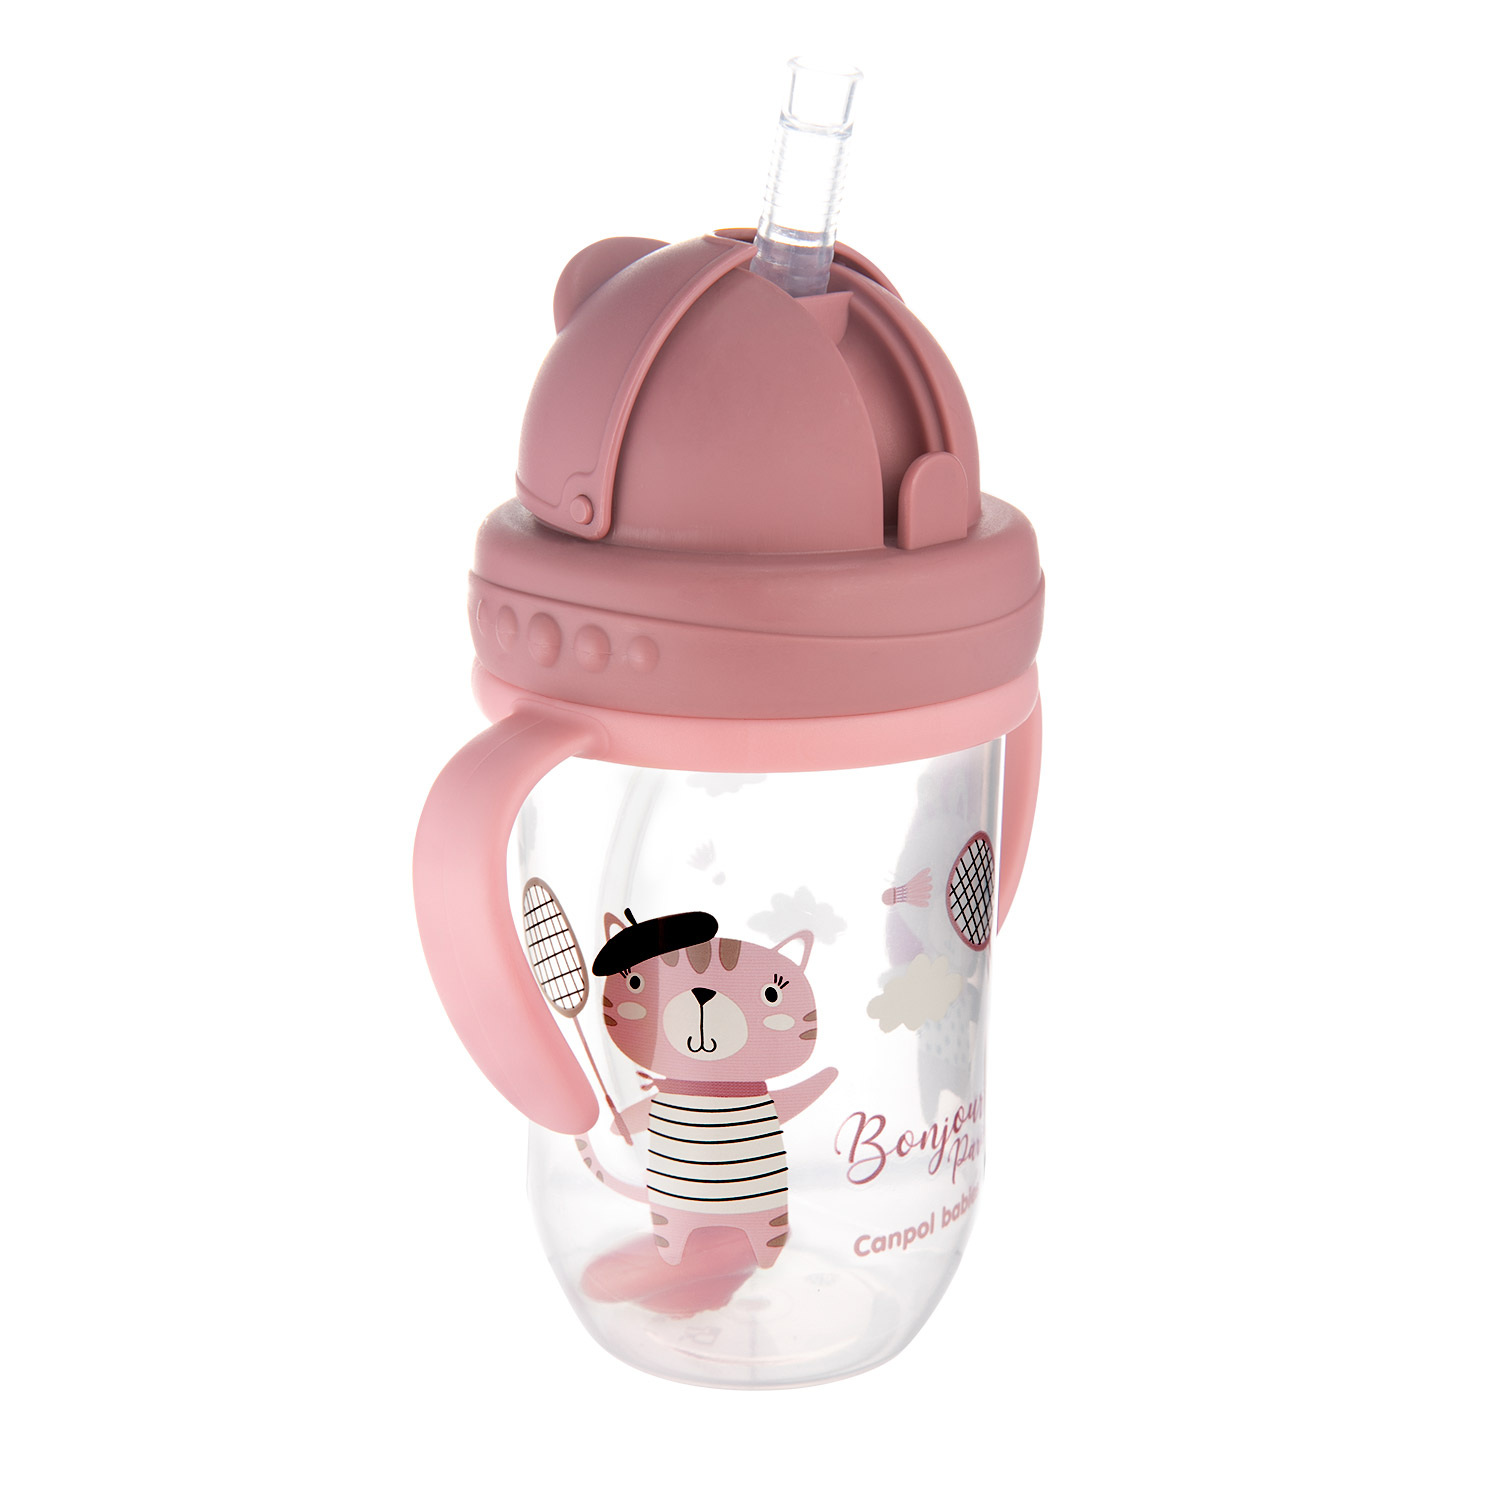 Canpol babies non-spill cup with weighted straw 270ml BONJOUR PARIS